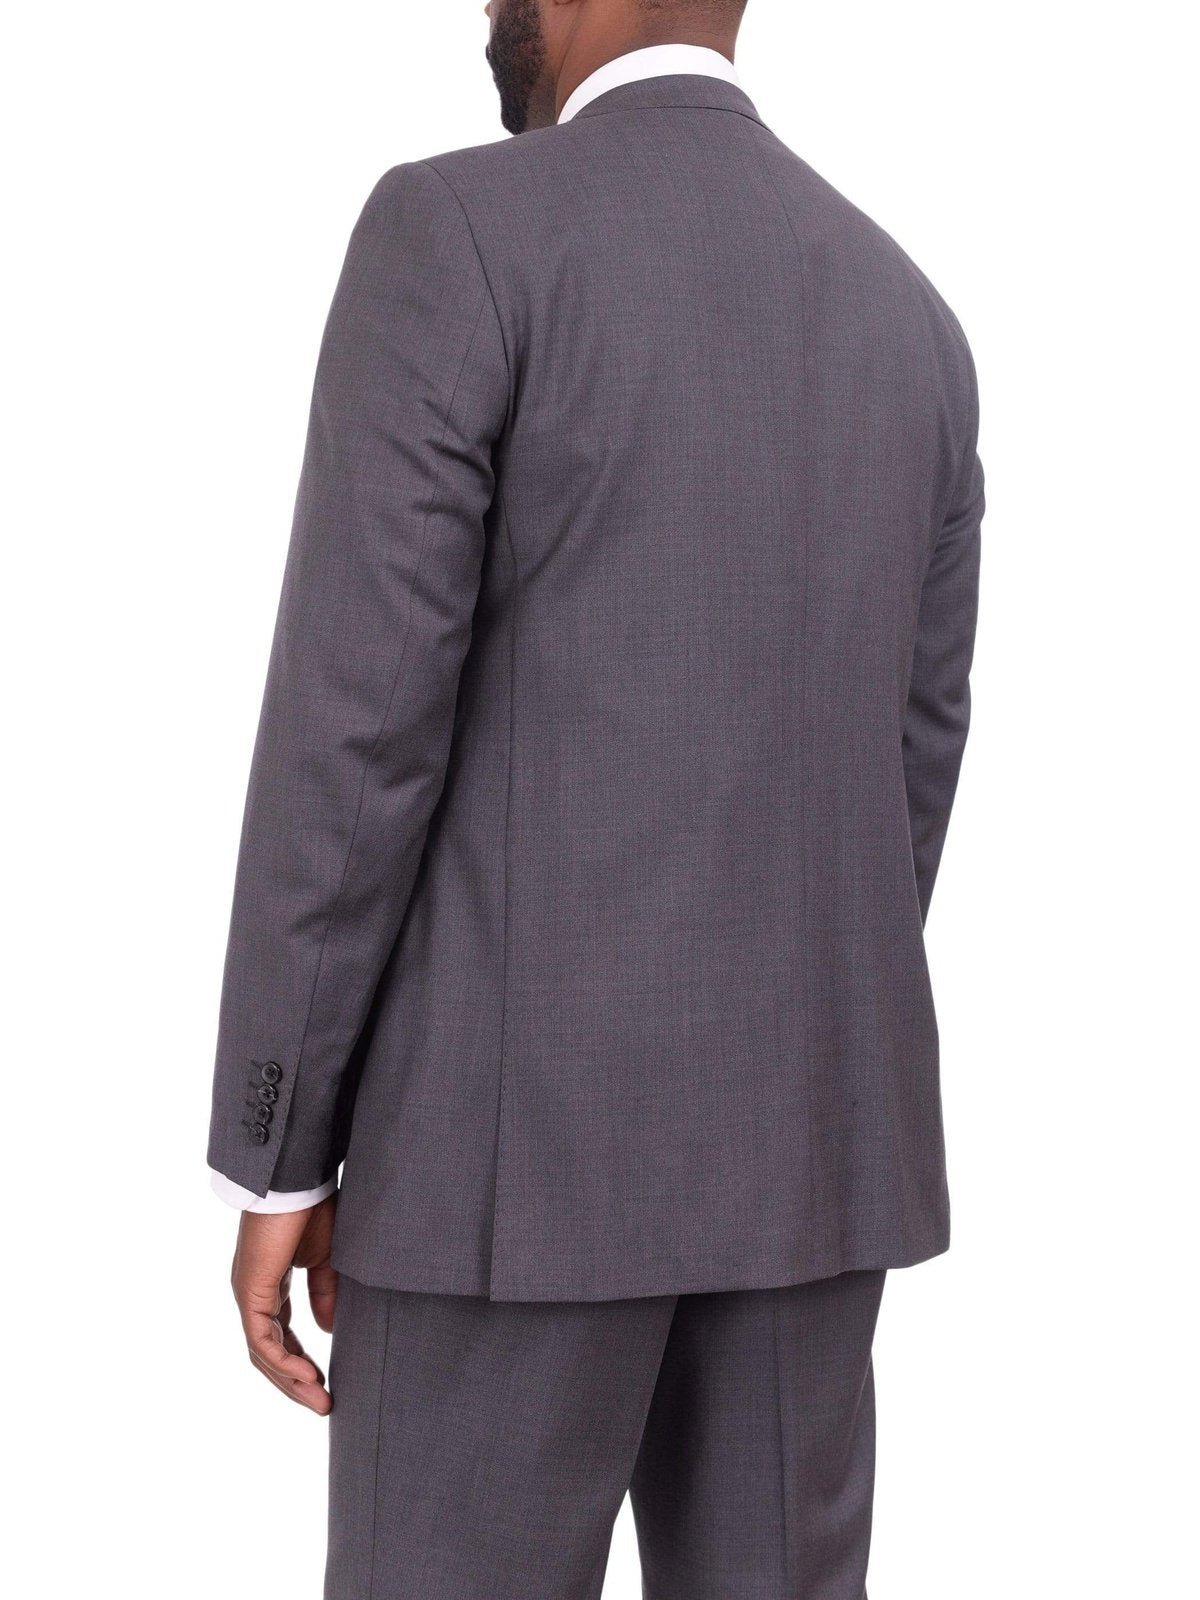 Giorgio Cosani TWO PIECE SUITS Giorgio Cosani Regular Fit Solid Charcoal Gray Two Button Wool Cashmere Suit